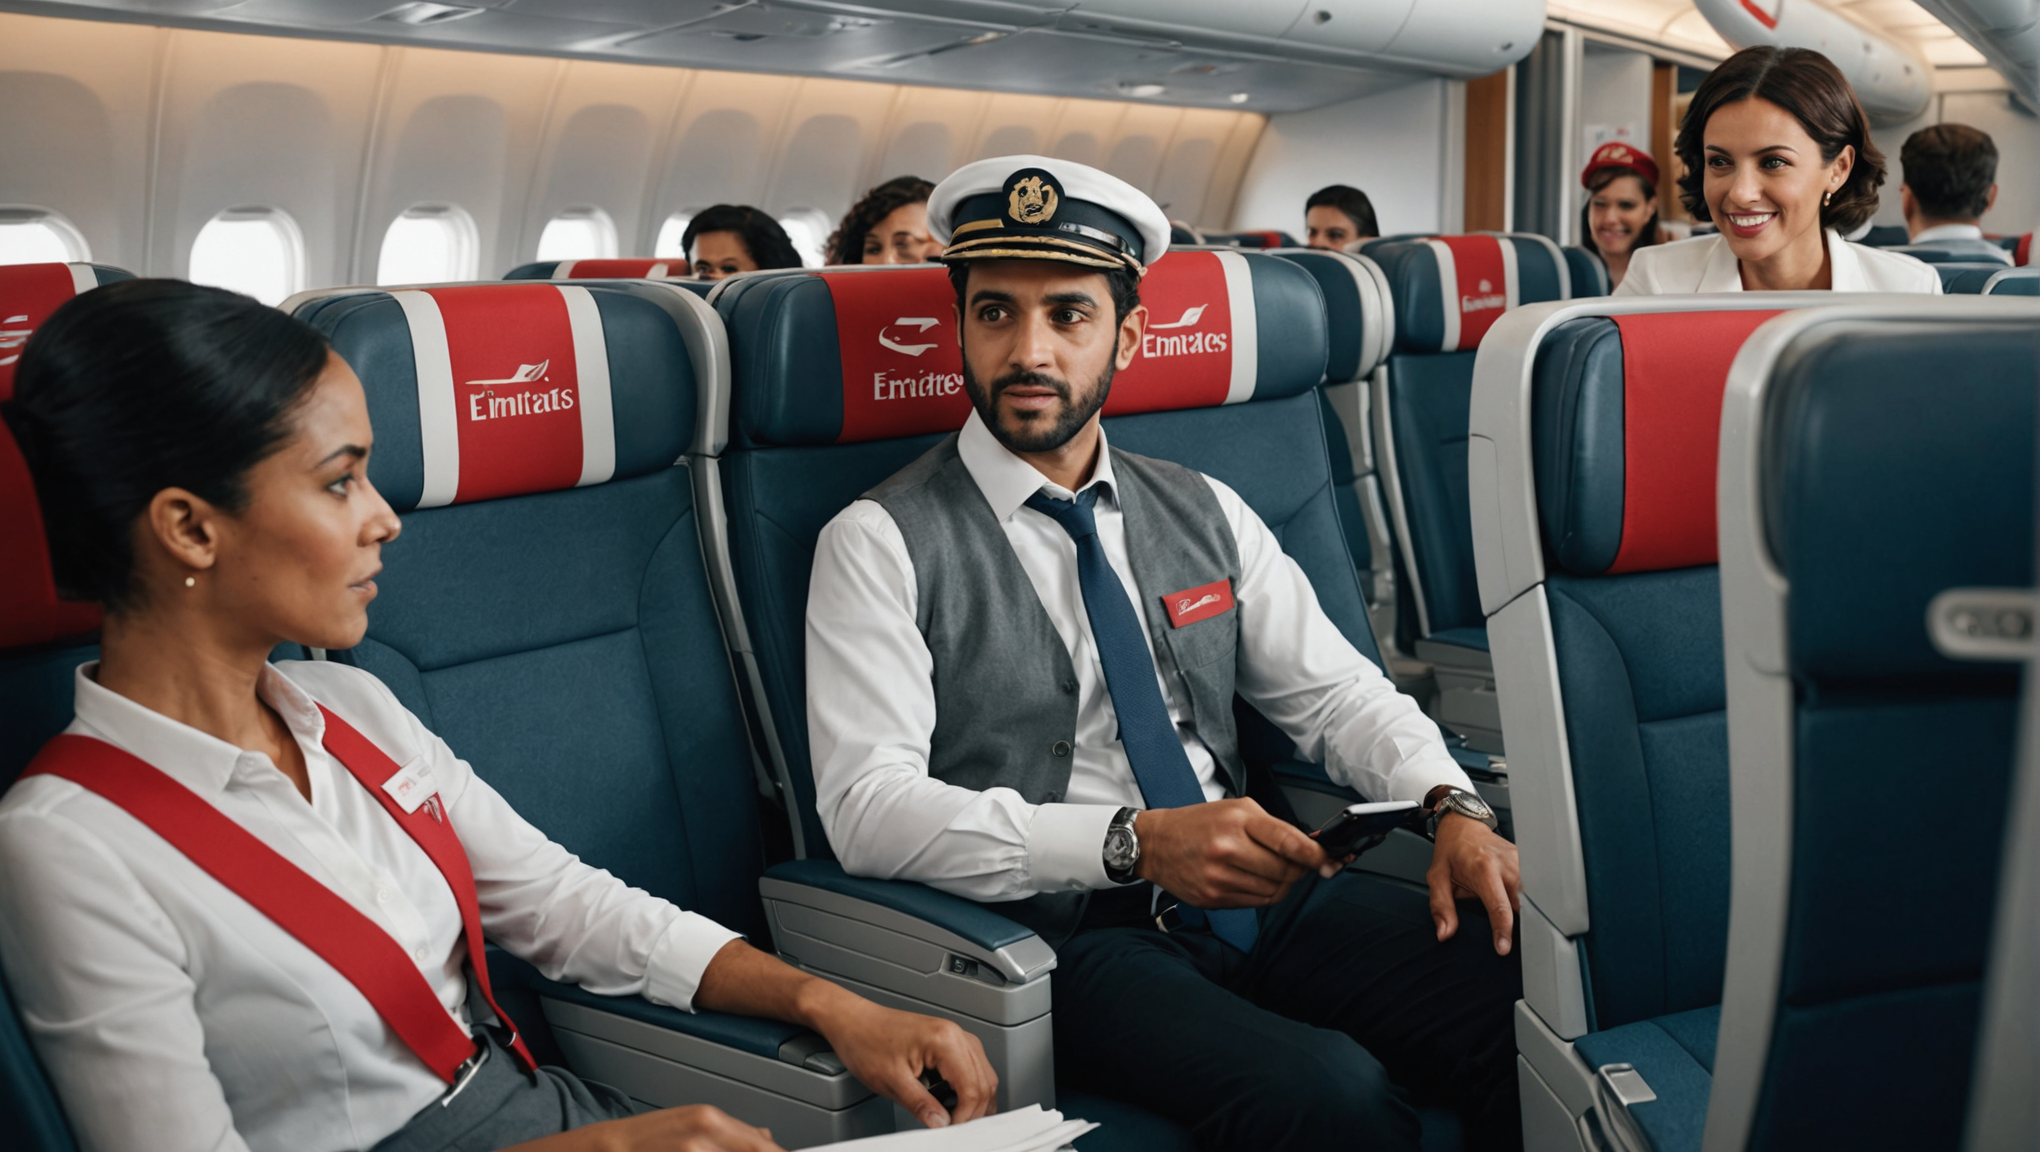 discover emirates' new straightforward approach in its safety video, asking passengers to keep their seatbelts fastened despite turbulence.